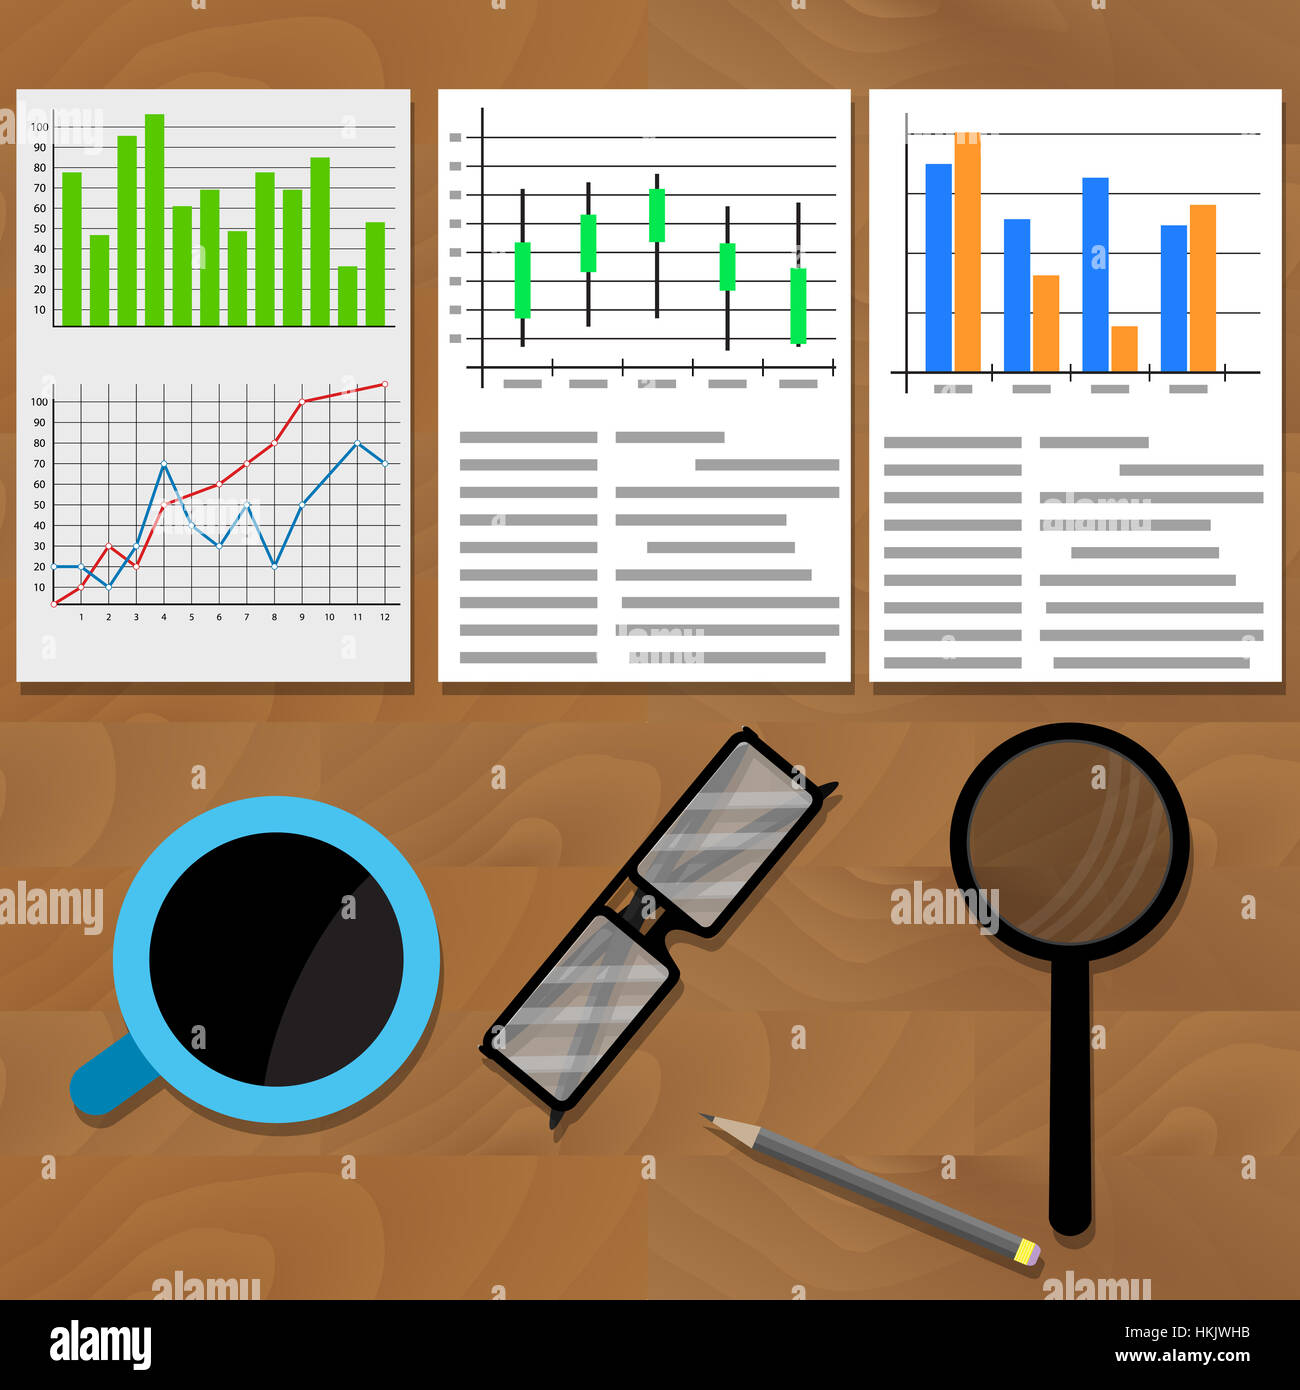 Analysis of data charts and graphs. Diagram statistic infographic, business workspace, vector illustration Stock Photo